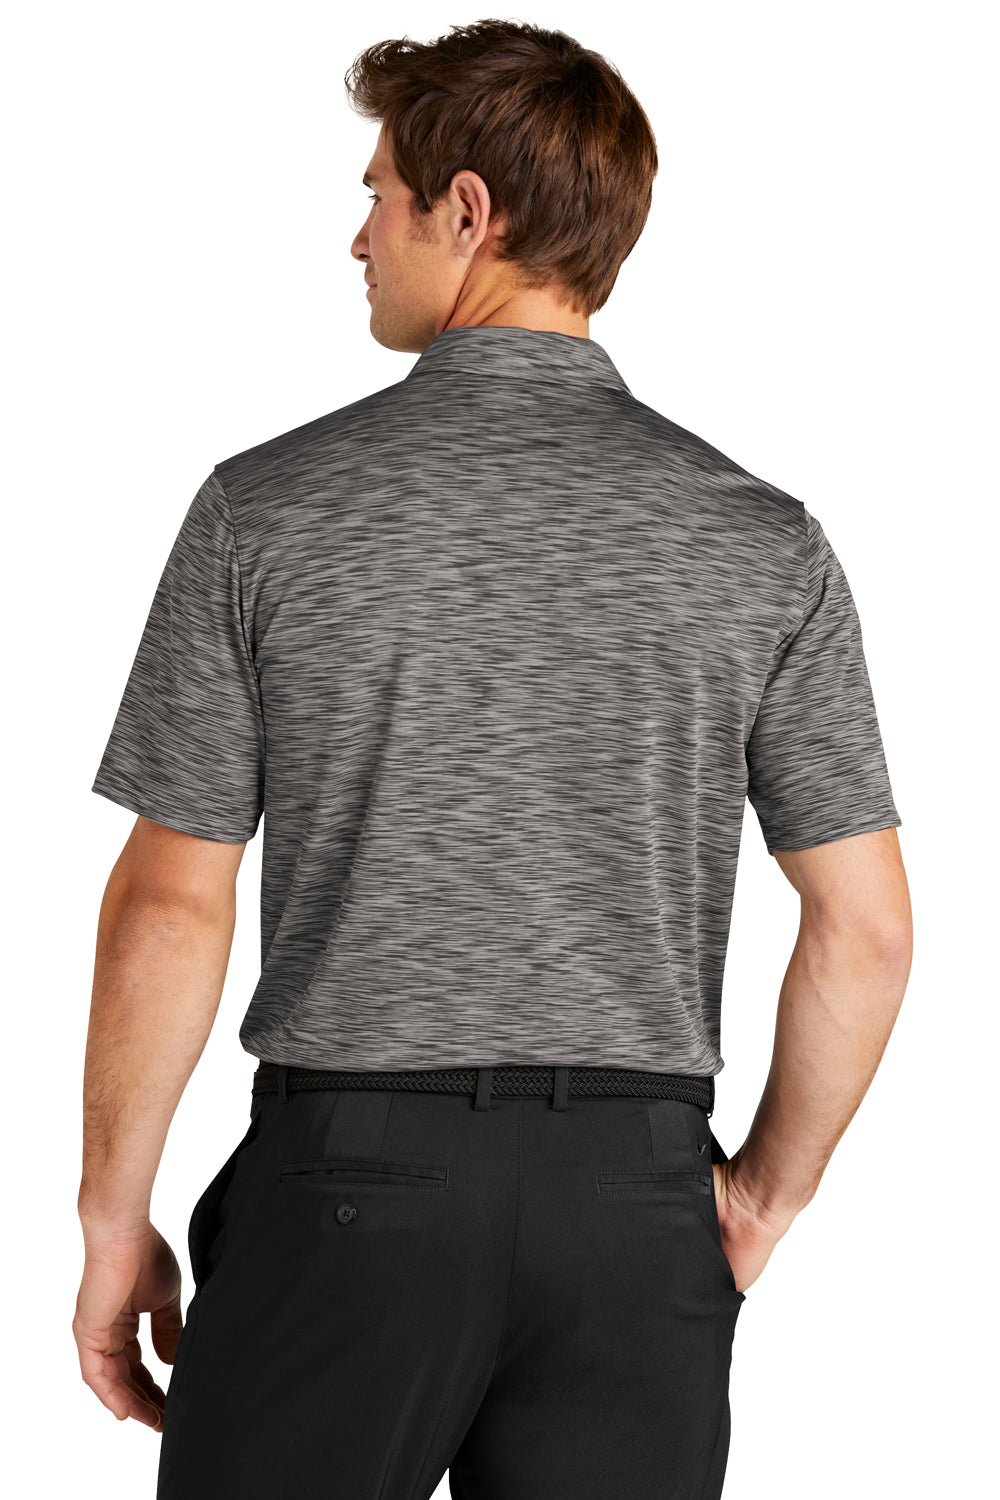 Nike NKDC2109 Mens Vapor Space Dyed Dri-Fit Moisture Wicking Short Sleeve Polo Shirt Anthracite Grey Model Back